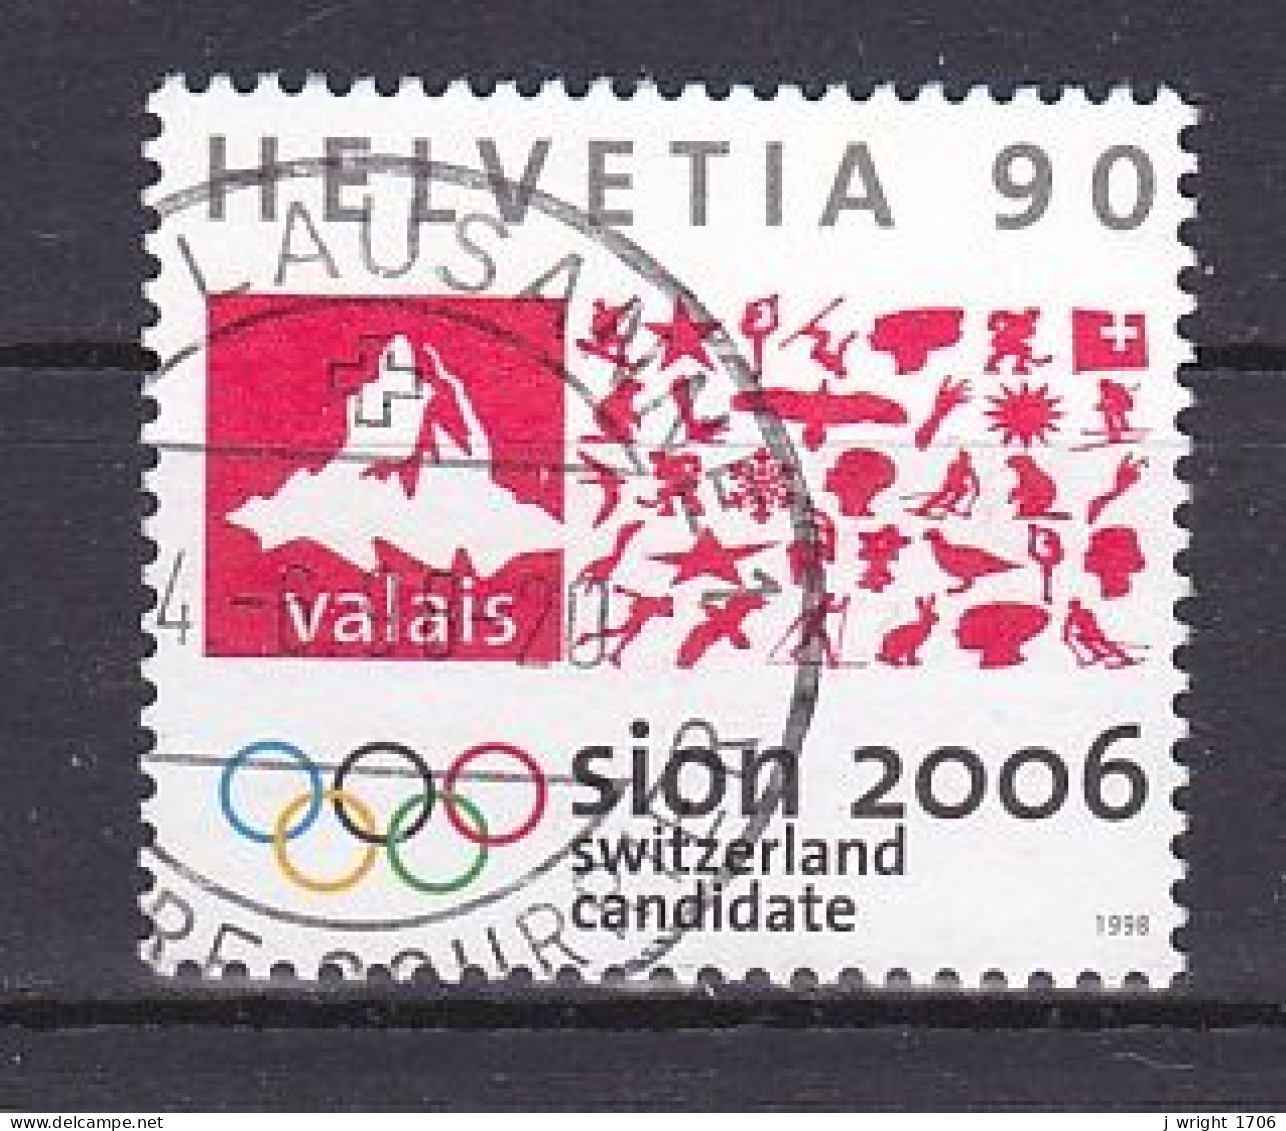 Switzerland, 1998, Winter Olympic Games Sion 2006, 90c, USED - Usados